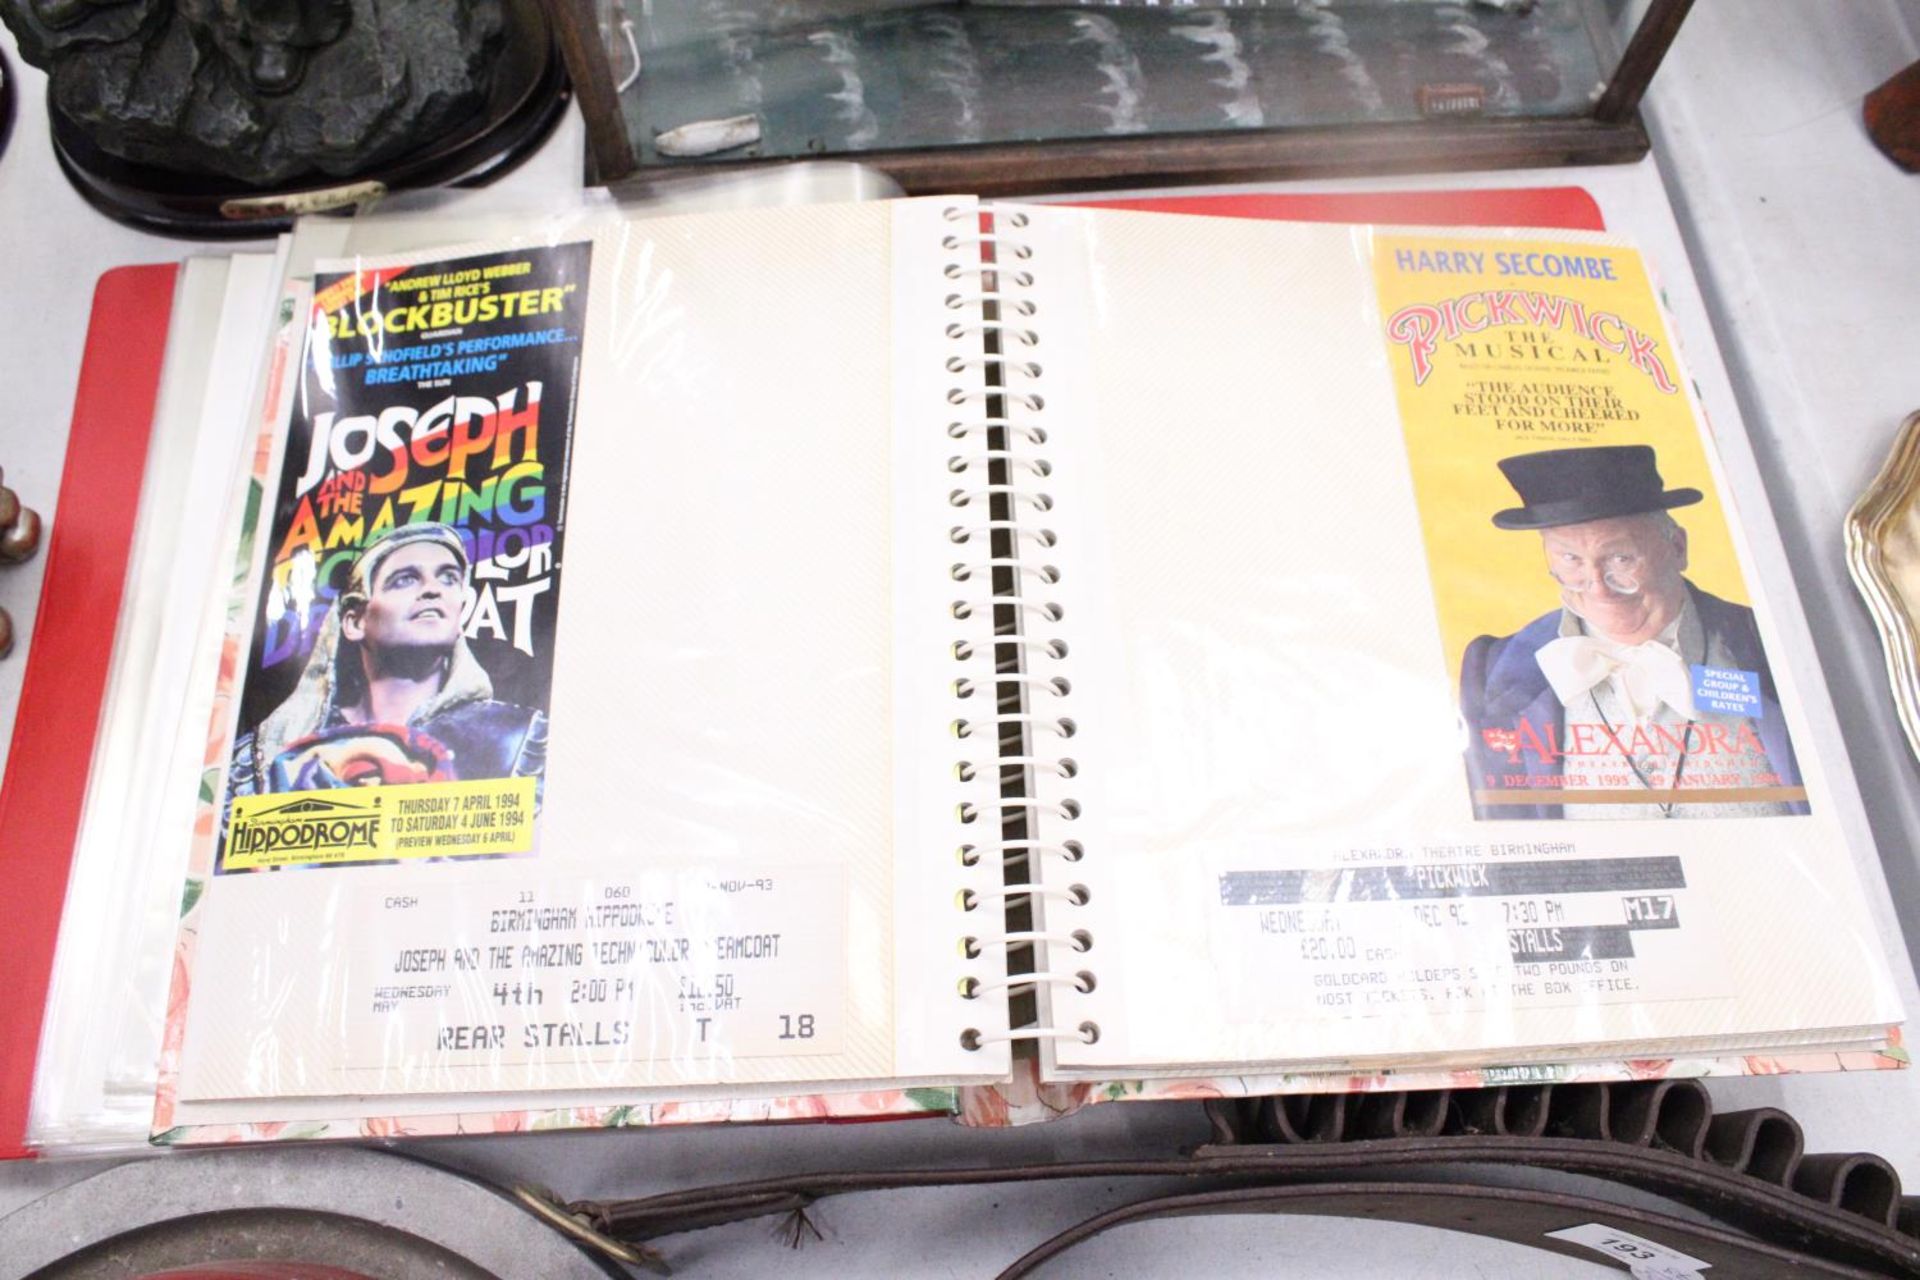 A COLLECTION OF VINTAGE THEATRE PROGRAMMES, TICKETS AND EPHEMERA - Image 4 of 5